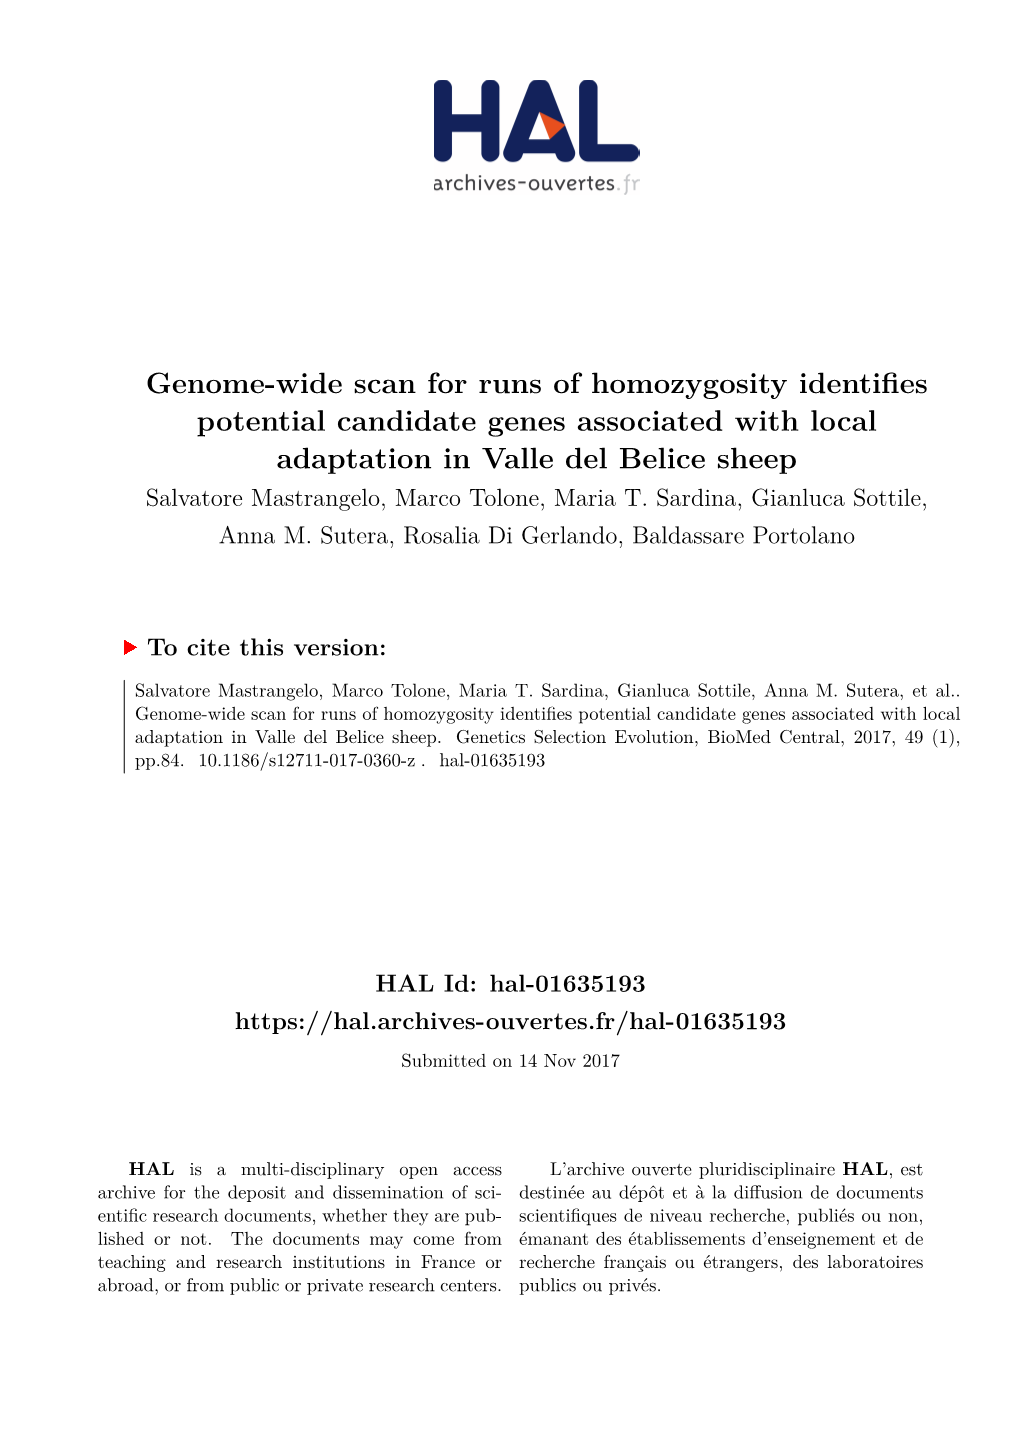 Genome-Wide Scan for Runs of Homozygosity Identifies Potential